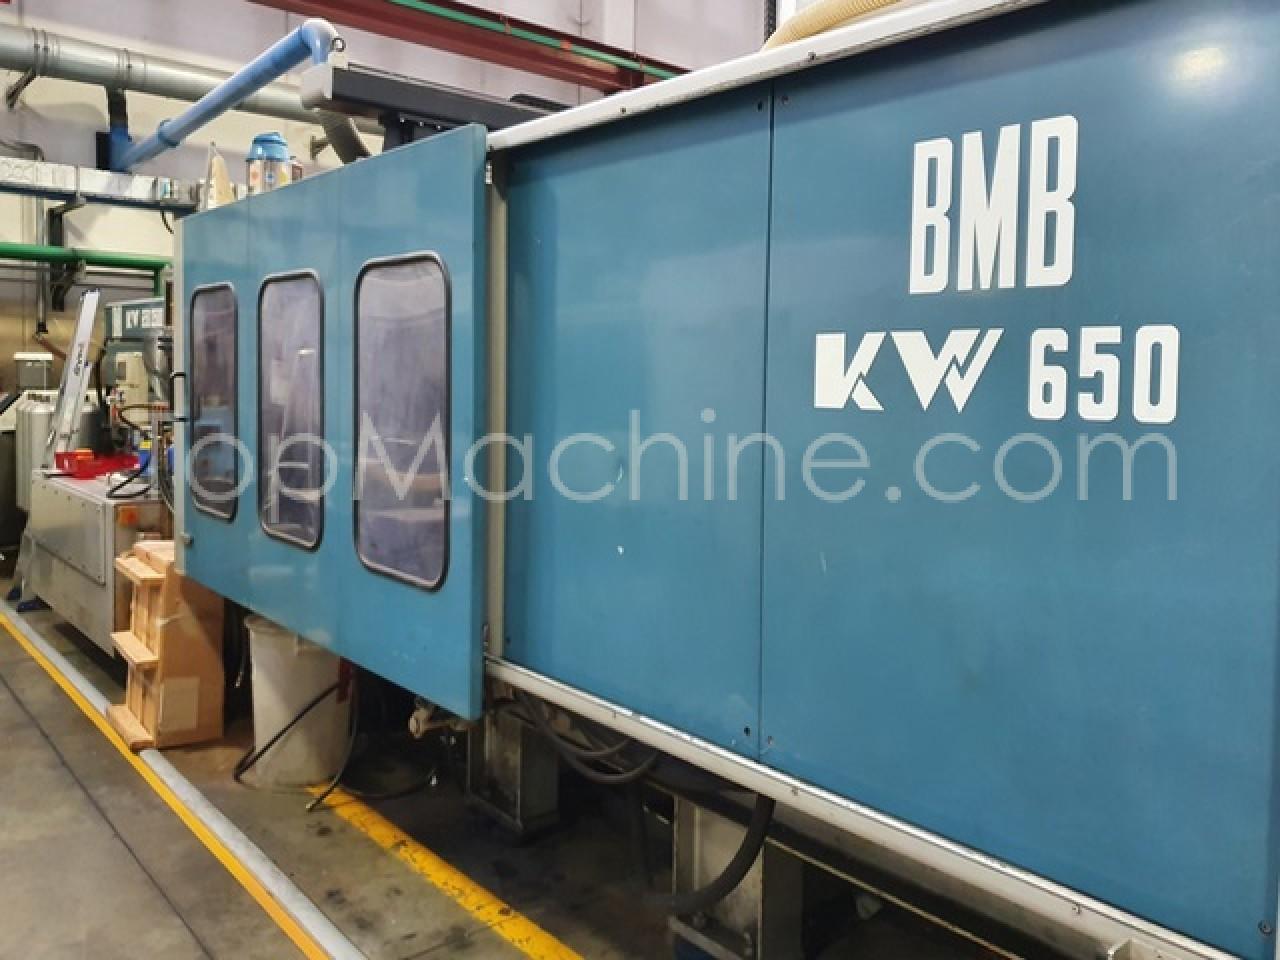 Used BMB KW 650 Injection Moulding Clamping force up to 1000 T